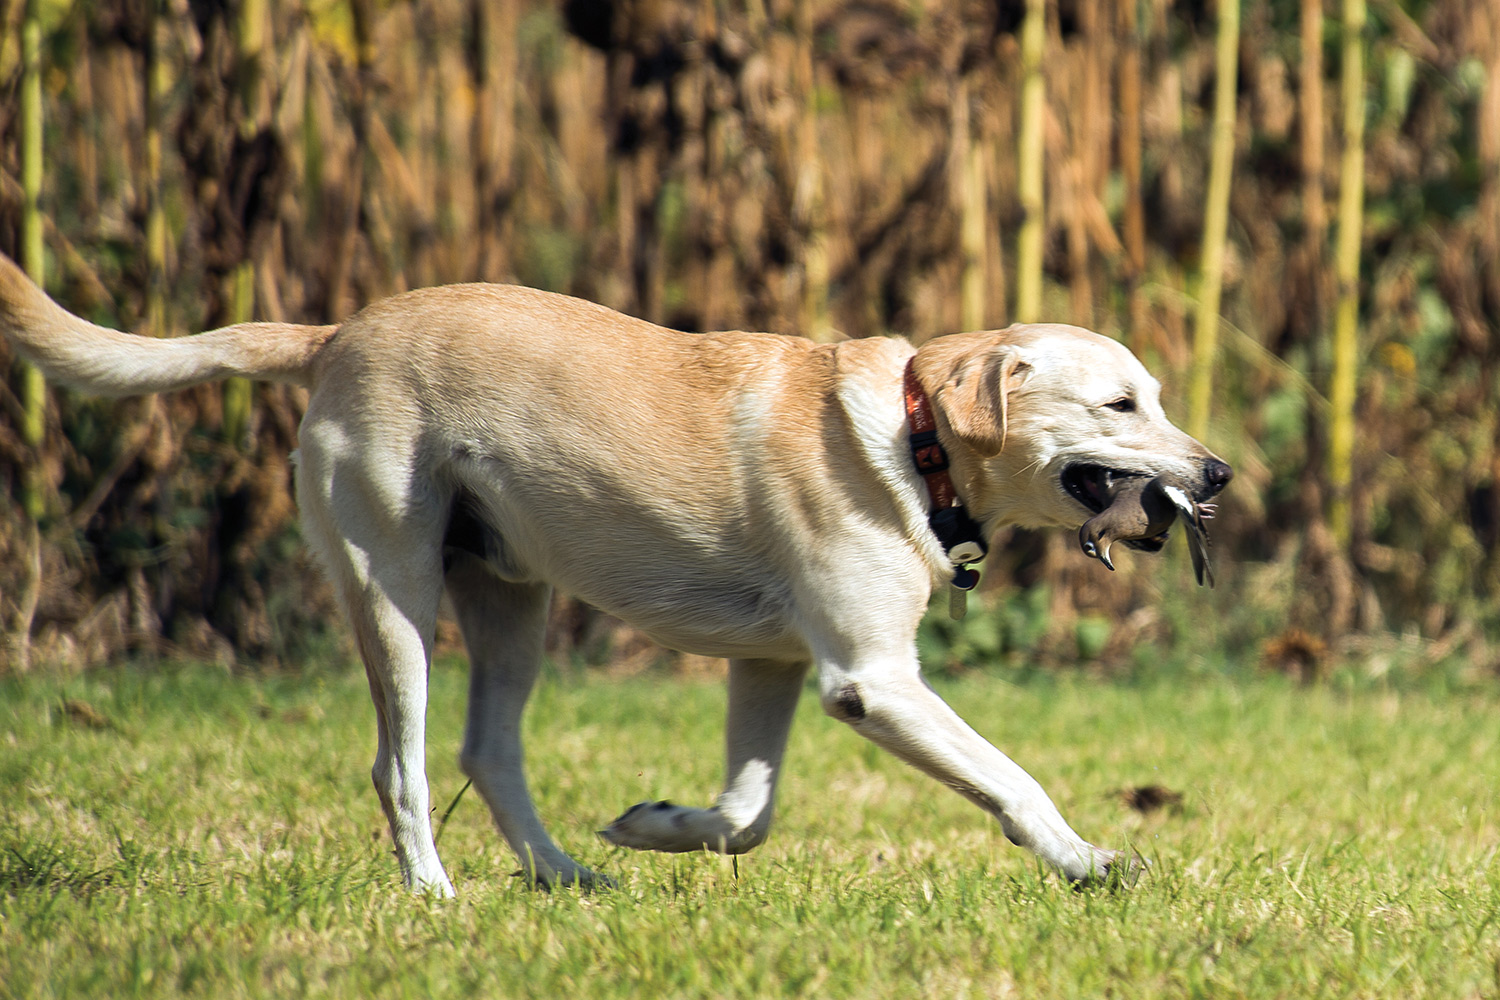 Yellow Lab carries dove in mouth over grass with dead sunflowers behind